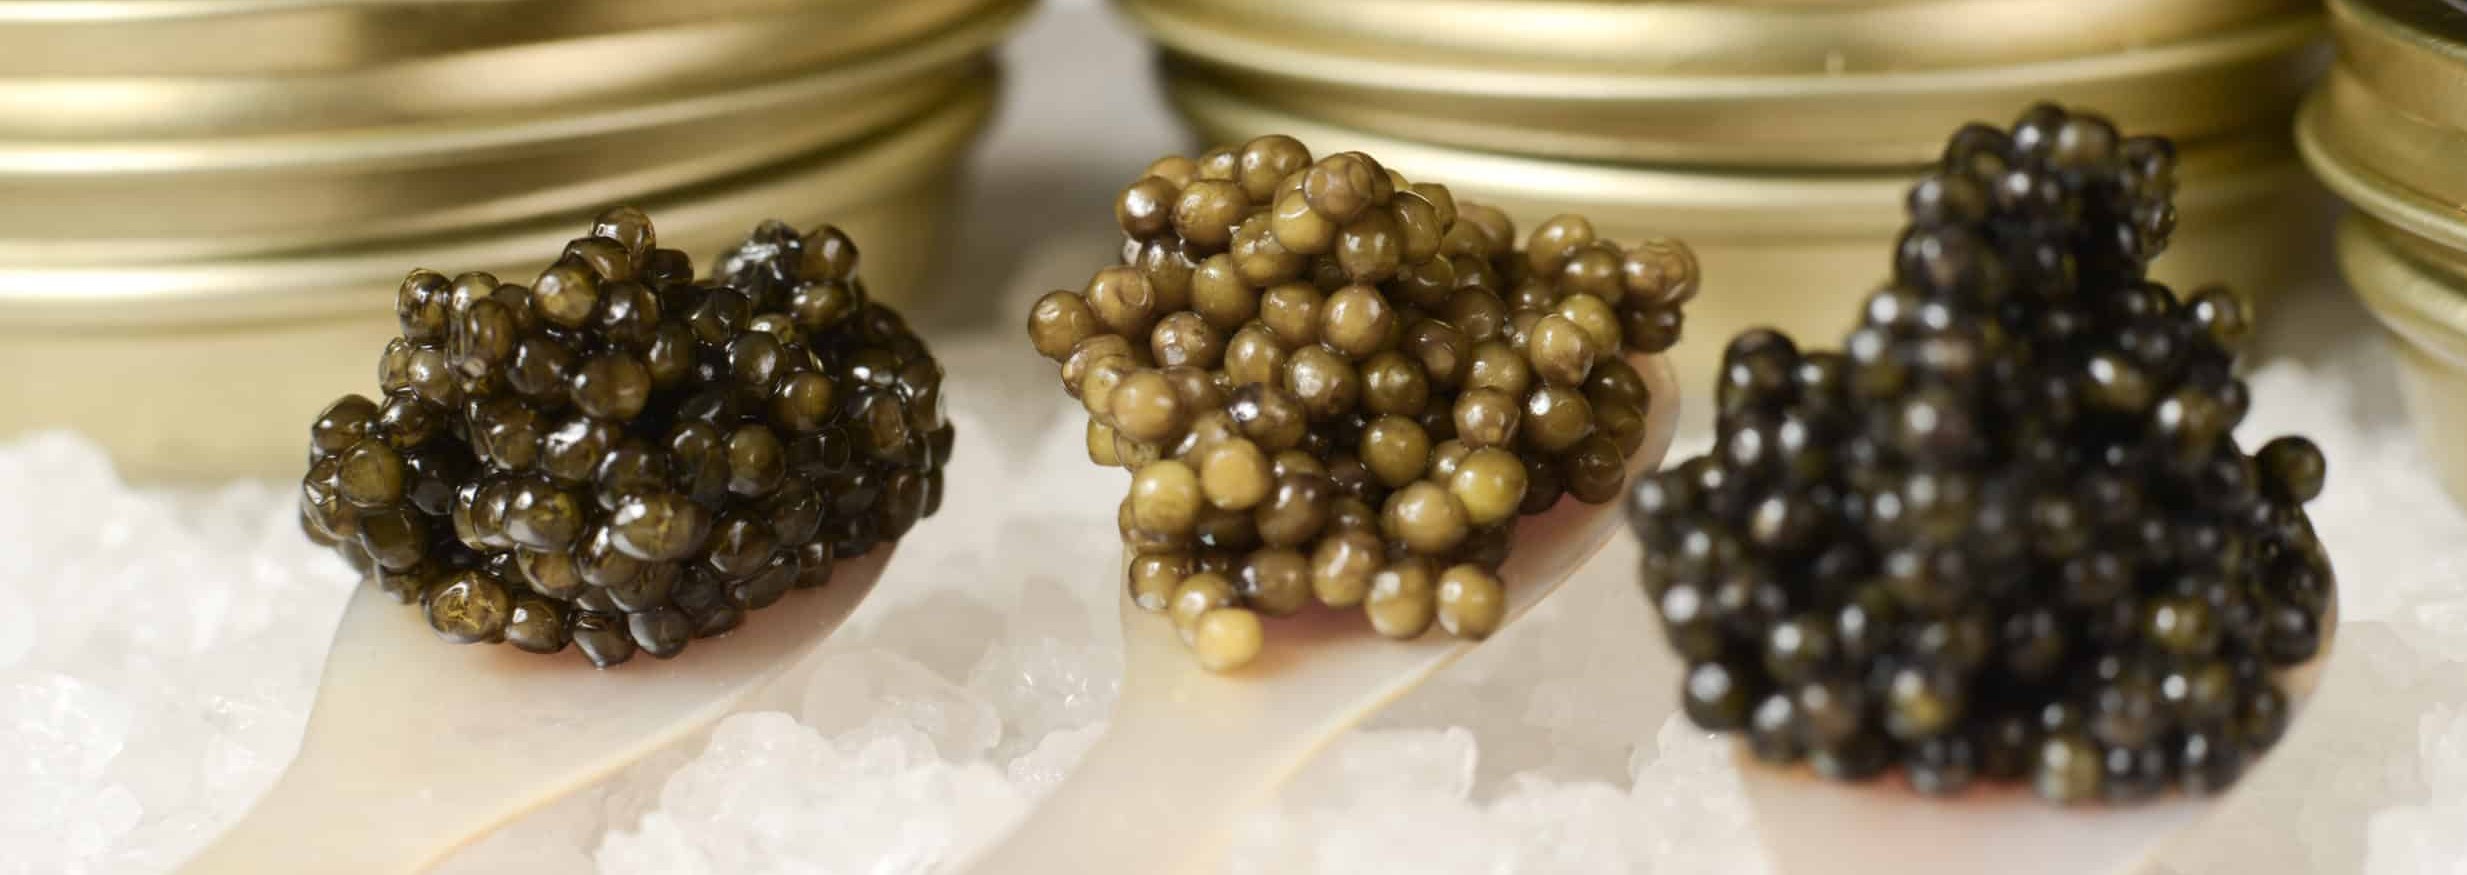 Three different types of white sturgeon caviar on pearl spoons